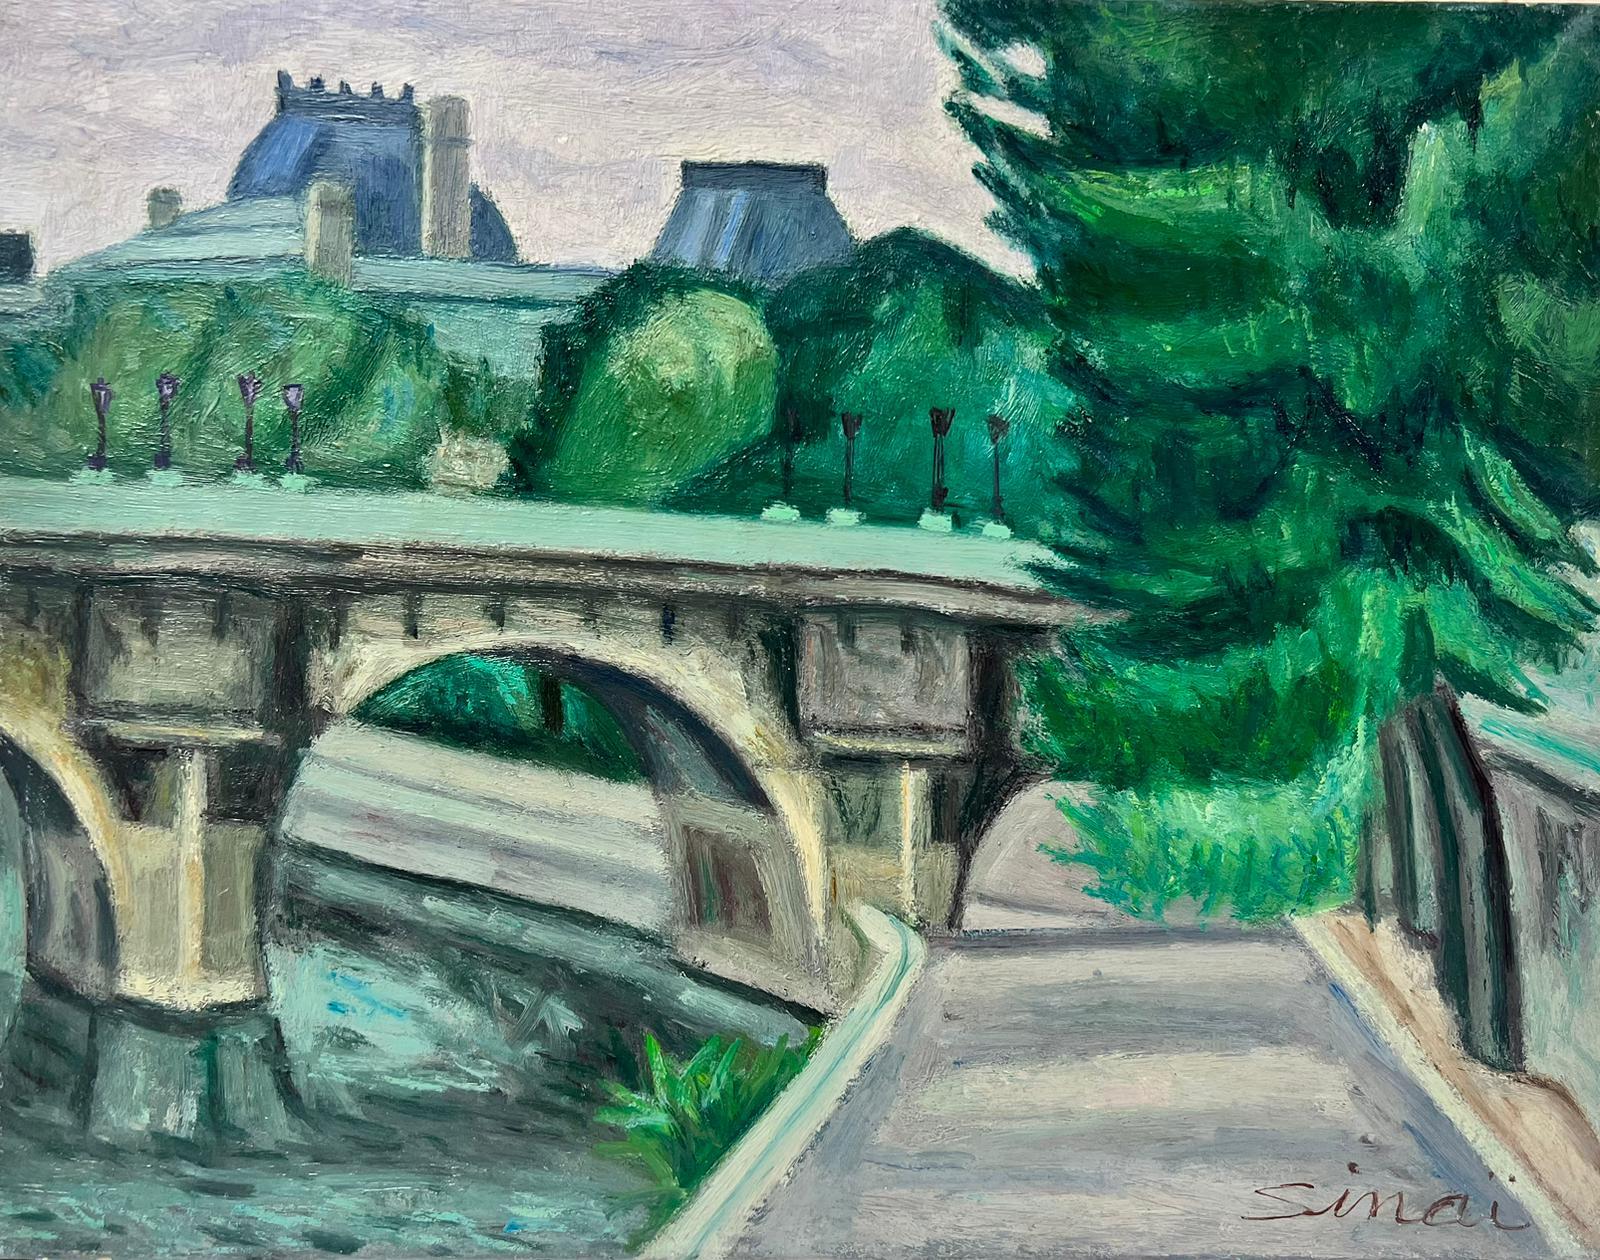 French School Landscape Painting - The River Seine Paris Old Stone Bridge with Trees 1970's French Oil Painting